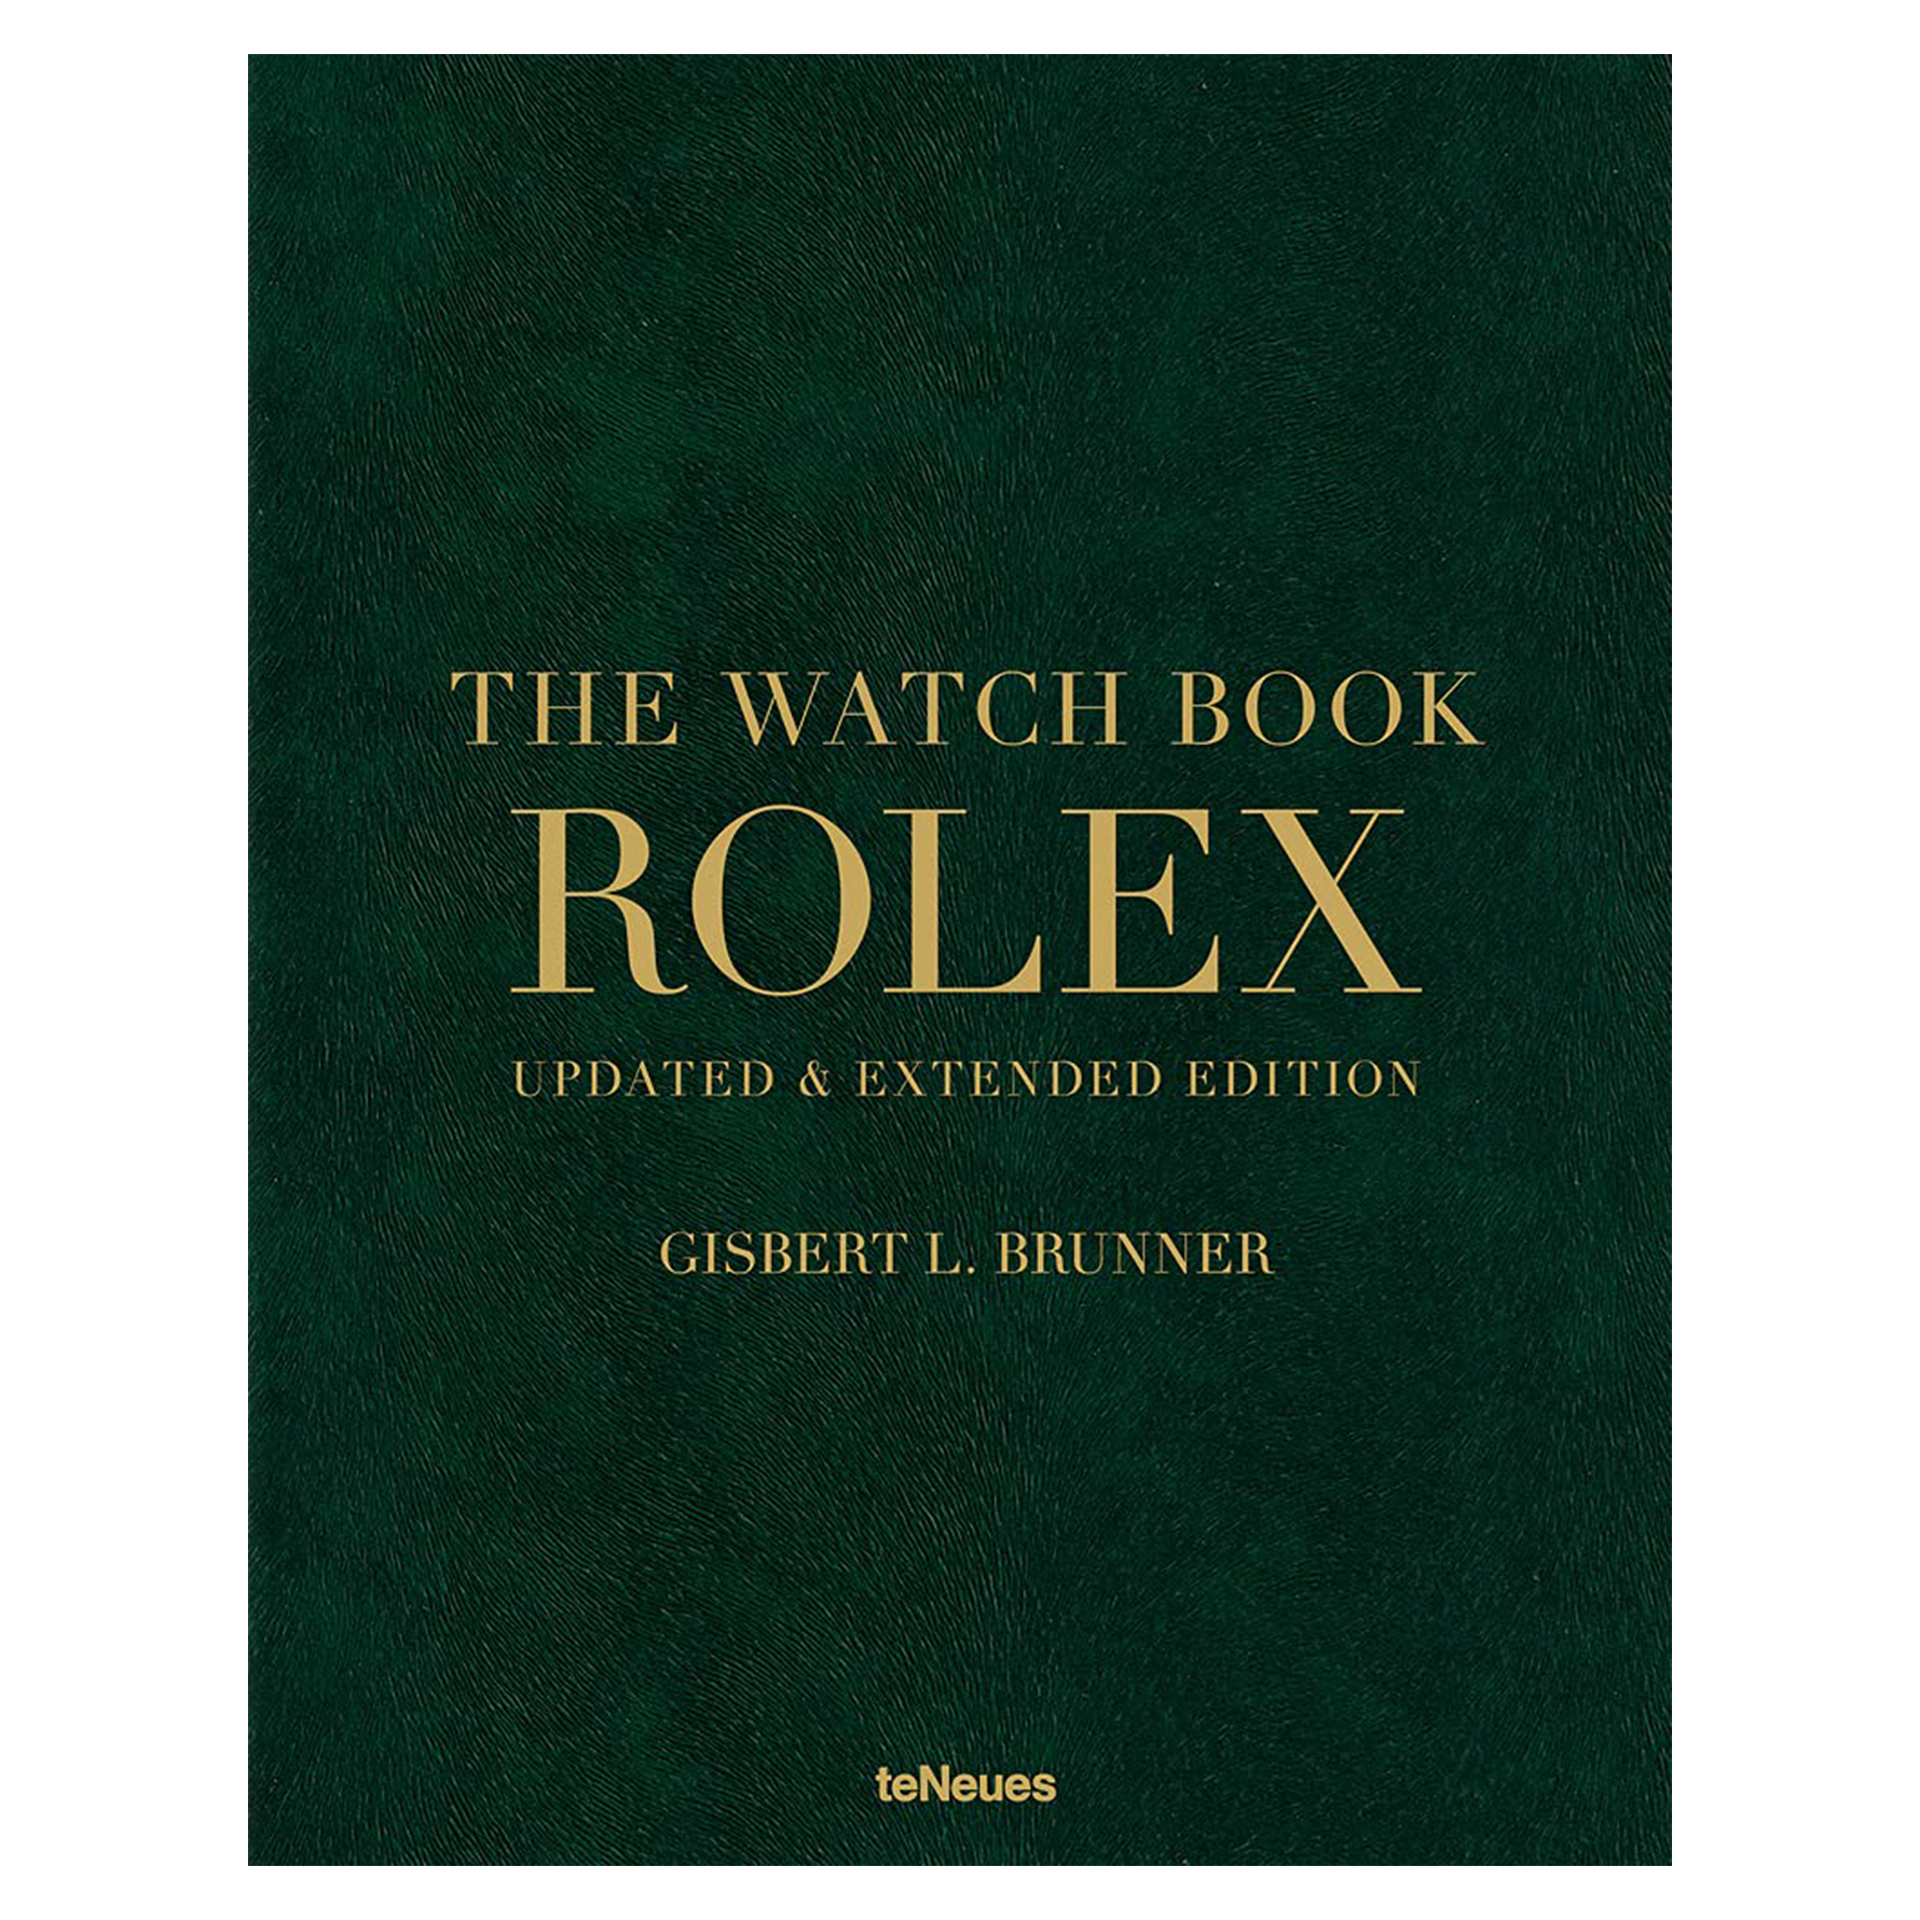 THE WATCH BOOK ROLEX NEW EDT BOOK